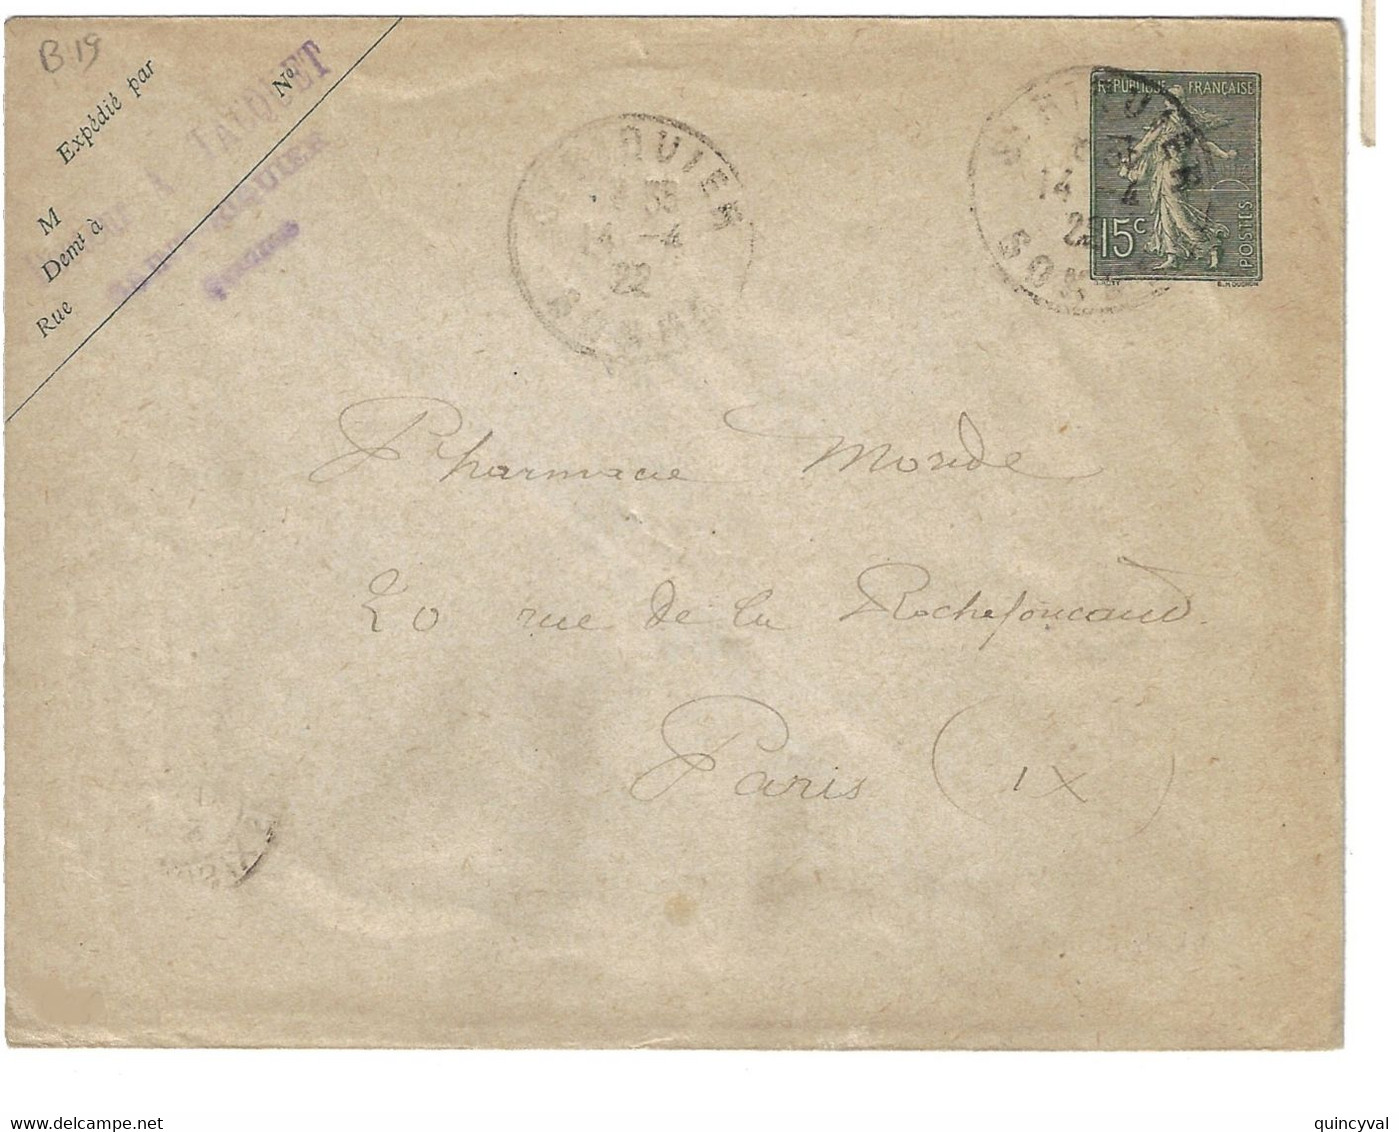 St RIQUIER Somme Enveloppe Entier 15c Semeuse Lignée Yv 130-E9 Mill 963 Ob 1922 Int Lilas - Standard Covers & Stamped On Demand (before 1995)